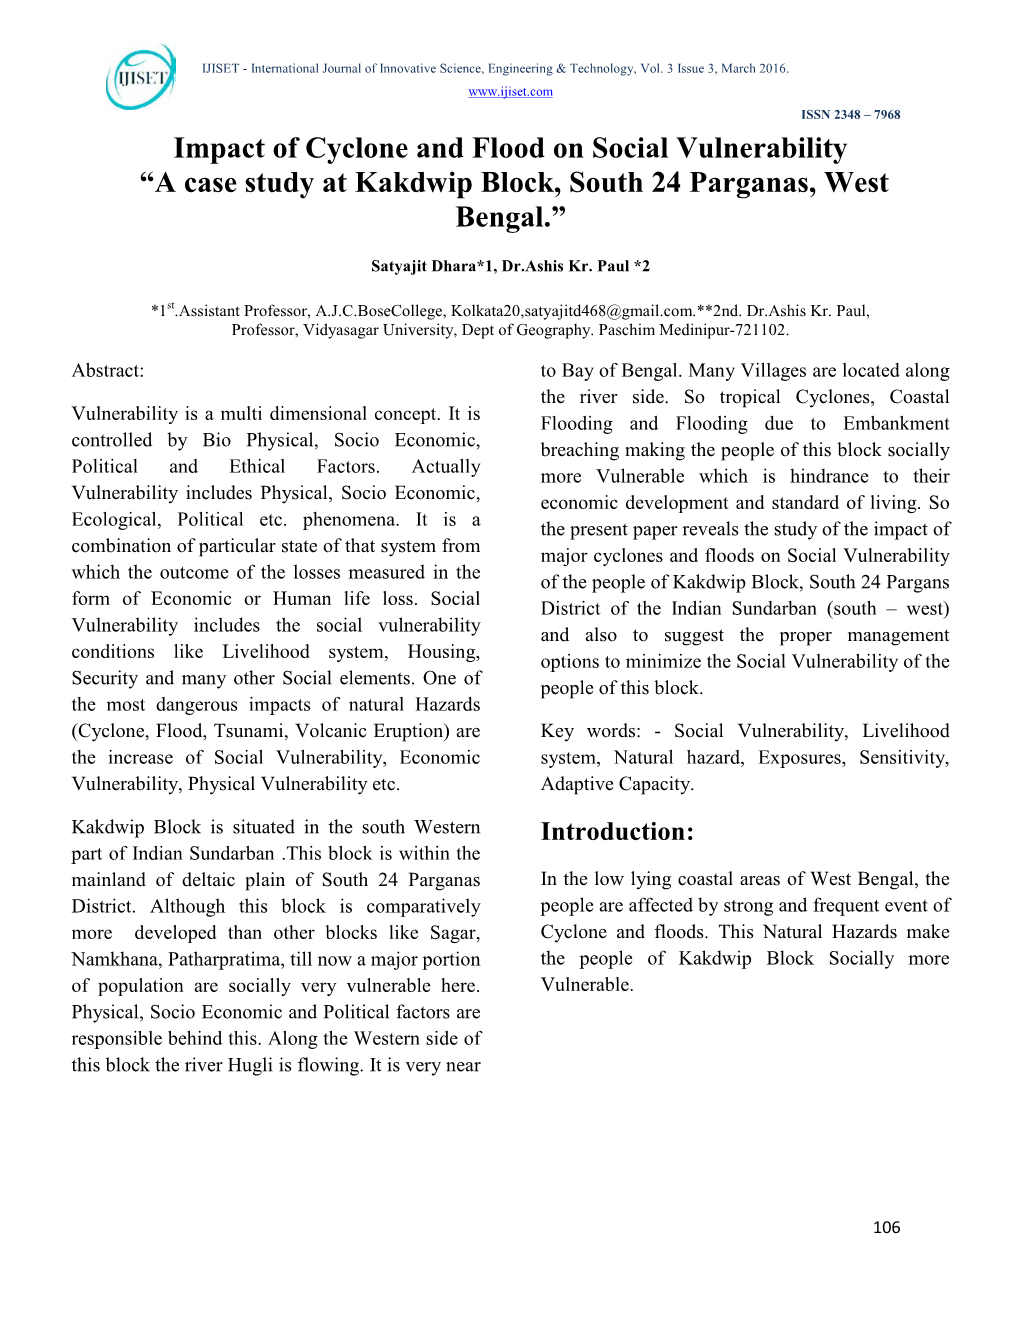 Impact of Cyclone and Flood on Social Vulnerability “A Case Study at Kakdwip Block, South 24 Parganas, West Bengal.”